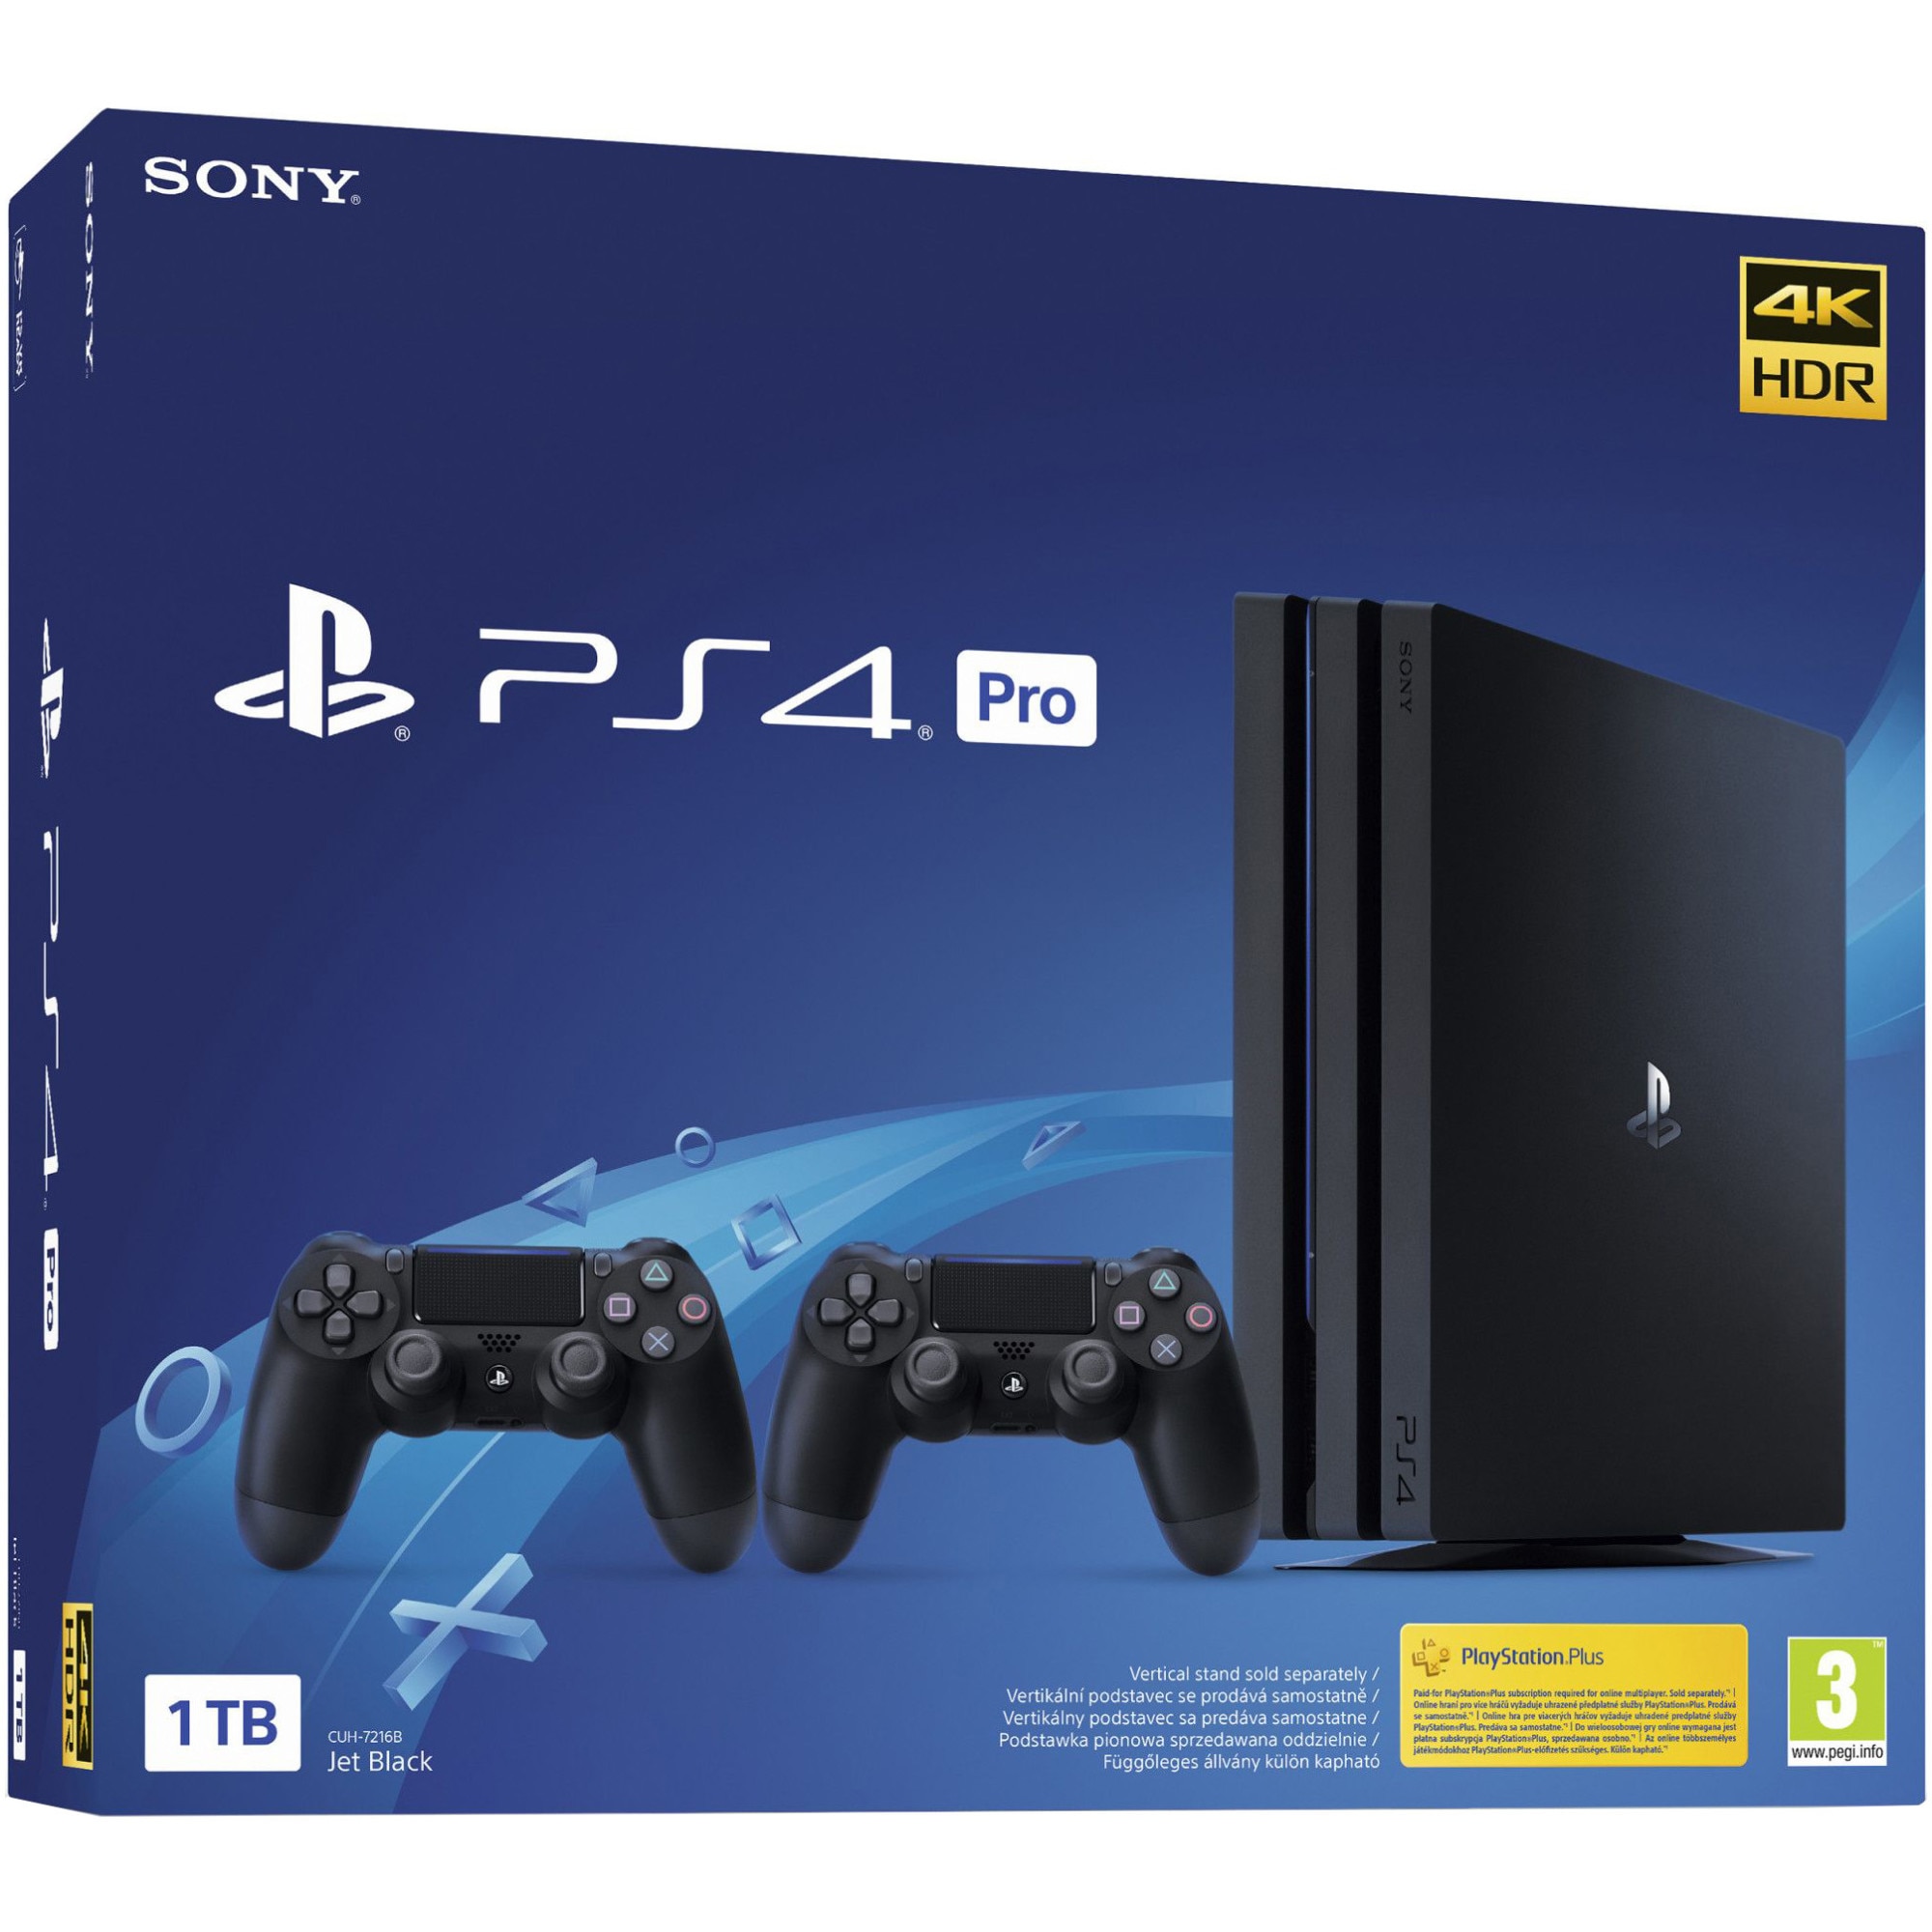 Federal Republican Party Warlike Consola Sony PlayStation 4 PRO, 1TB + Extra controller DS4v2, Negru -  eMAG.ro